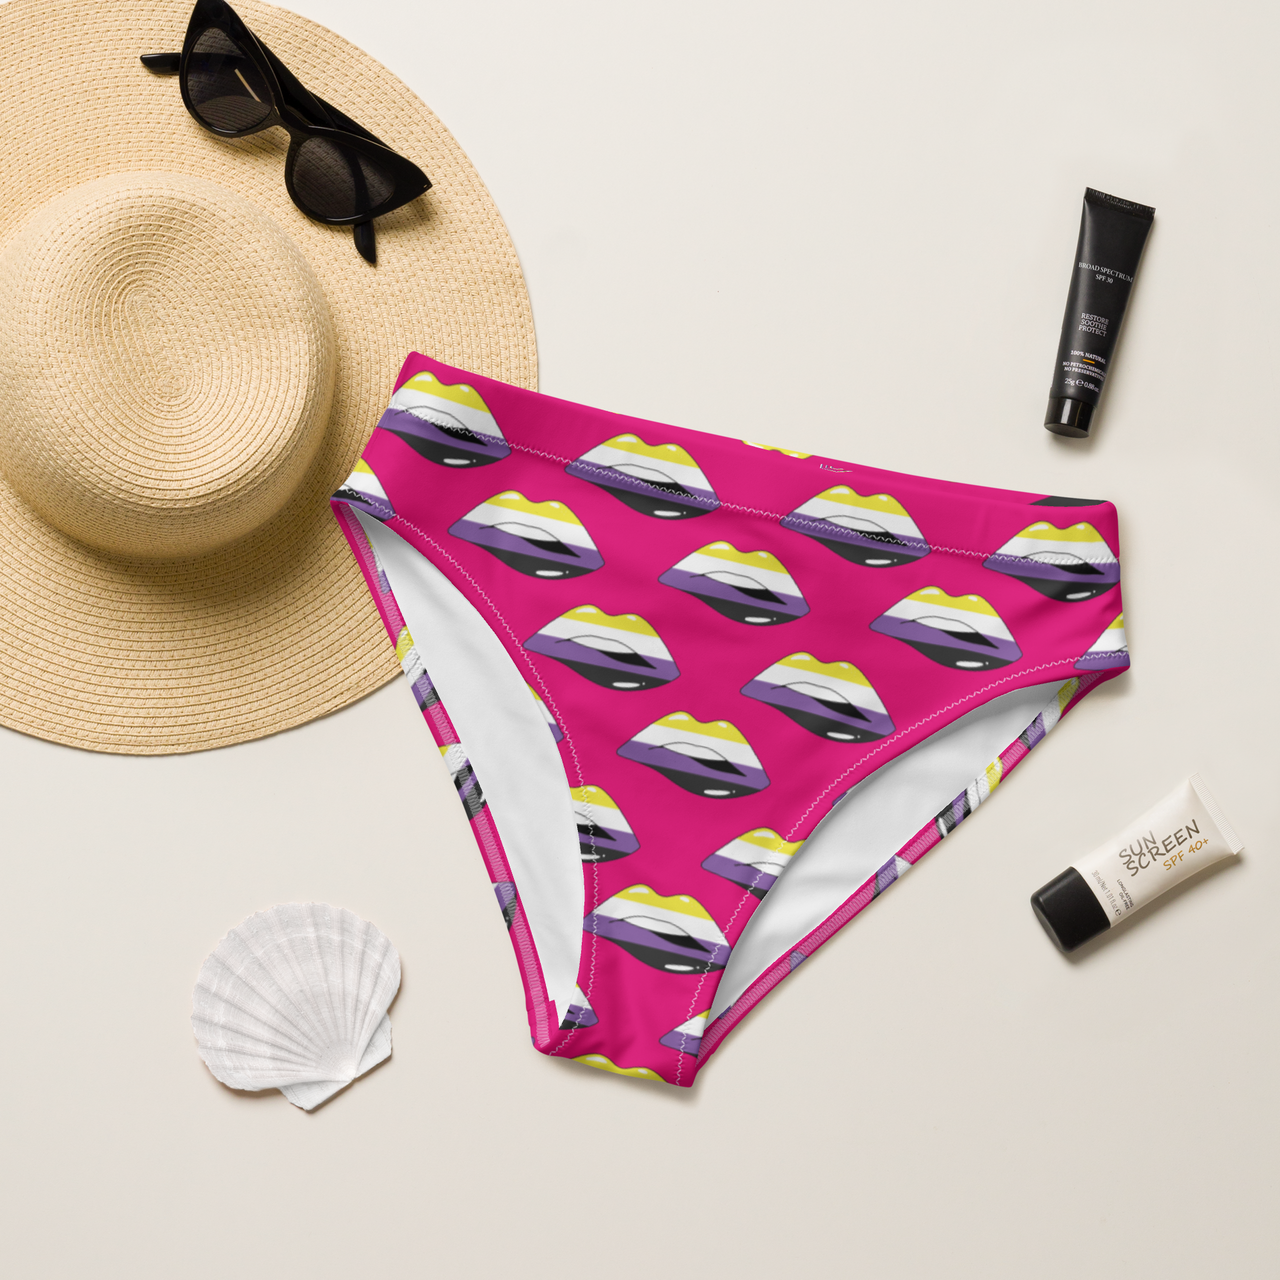 Non-Binary Flag LGBTQ Kisses Underwear for They/Them Him/Her - Pink SHAVA